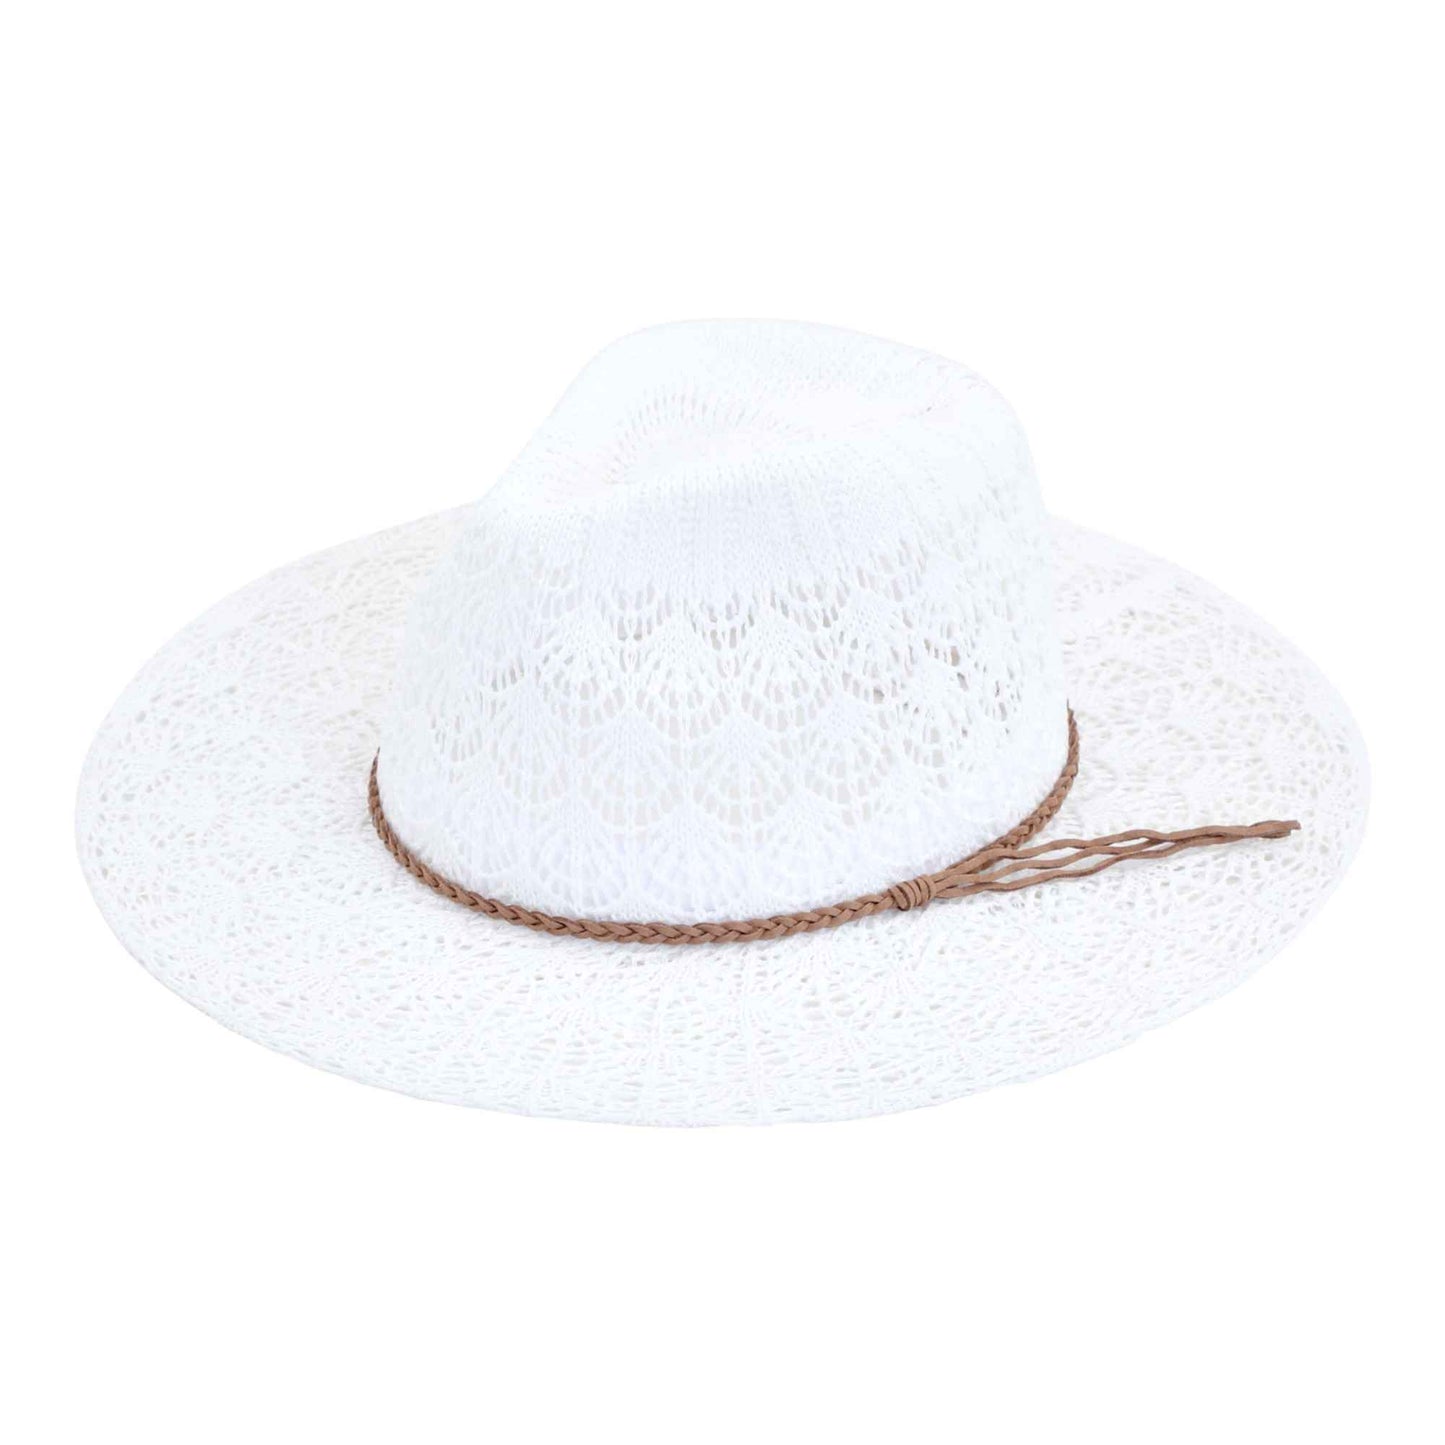 KP013 Horseshoe Lace With Braided Suede Trim Panama Hat